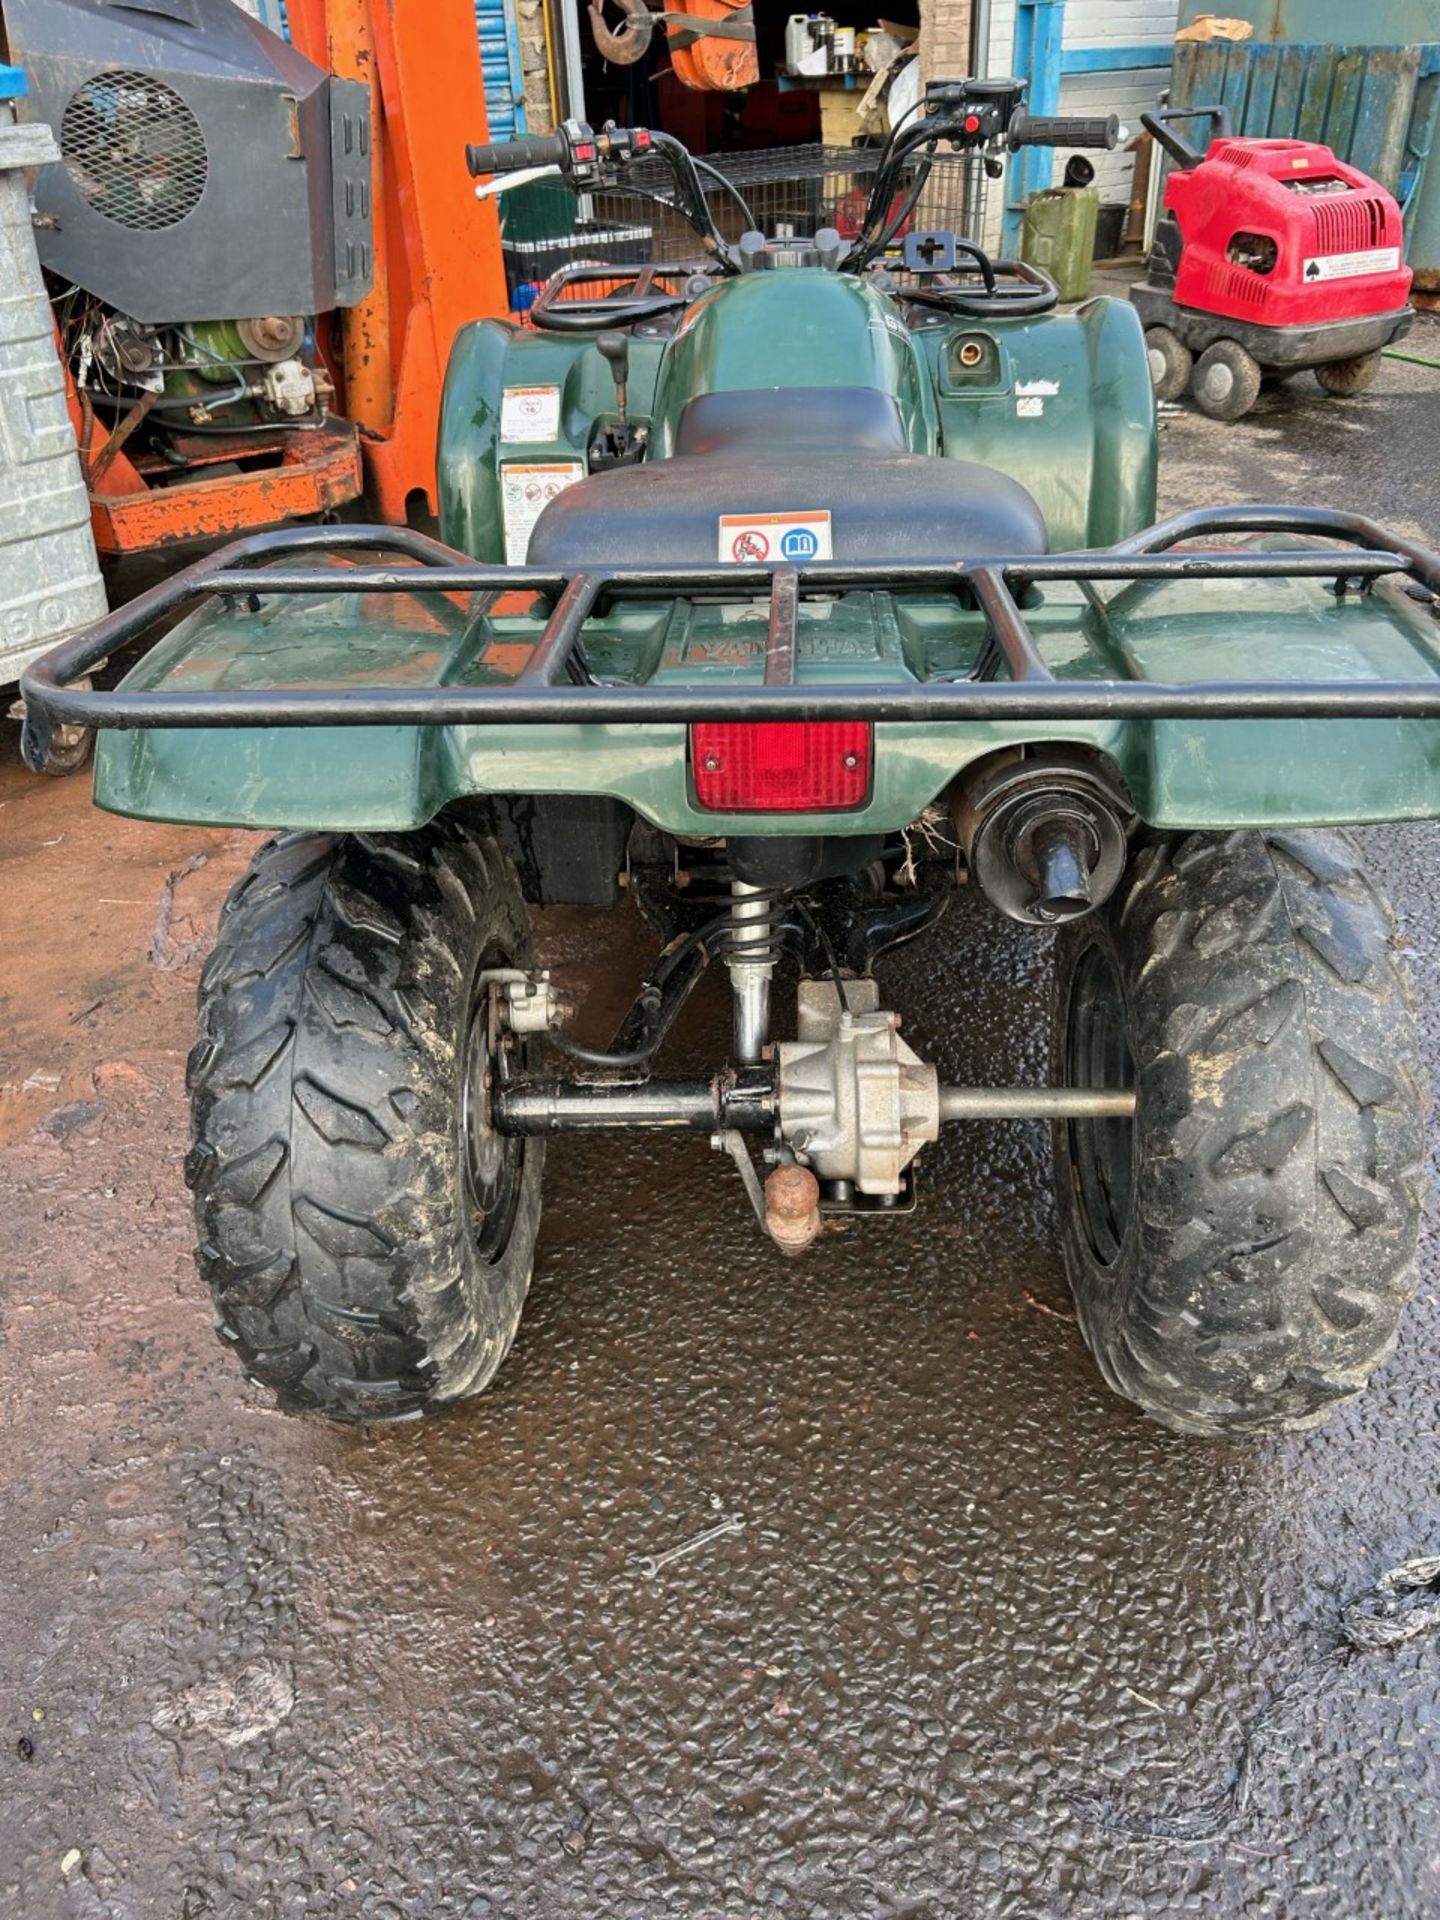 Yamaha grizzly 400cc 4x4 quad bike. 2000 model. Good condition ready for work. - Image 3 of 3